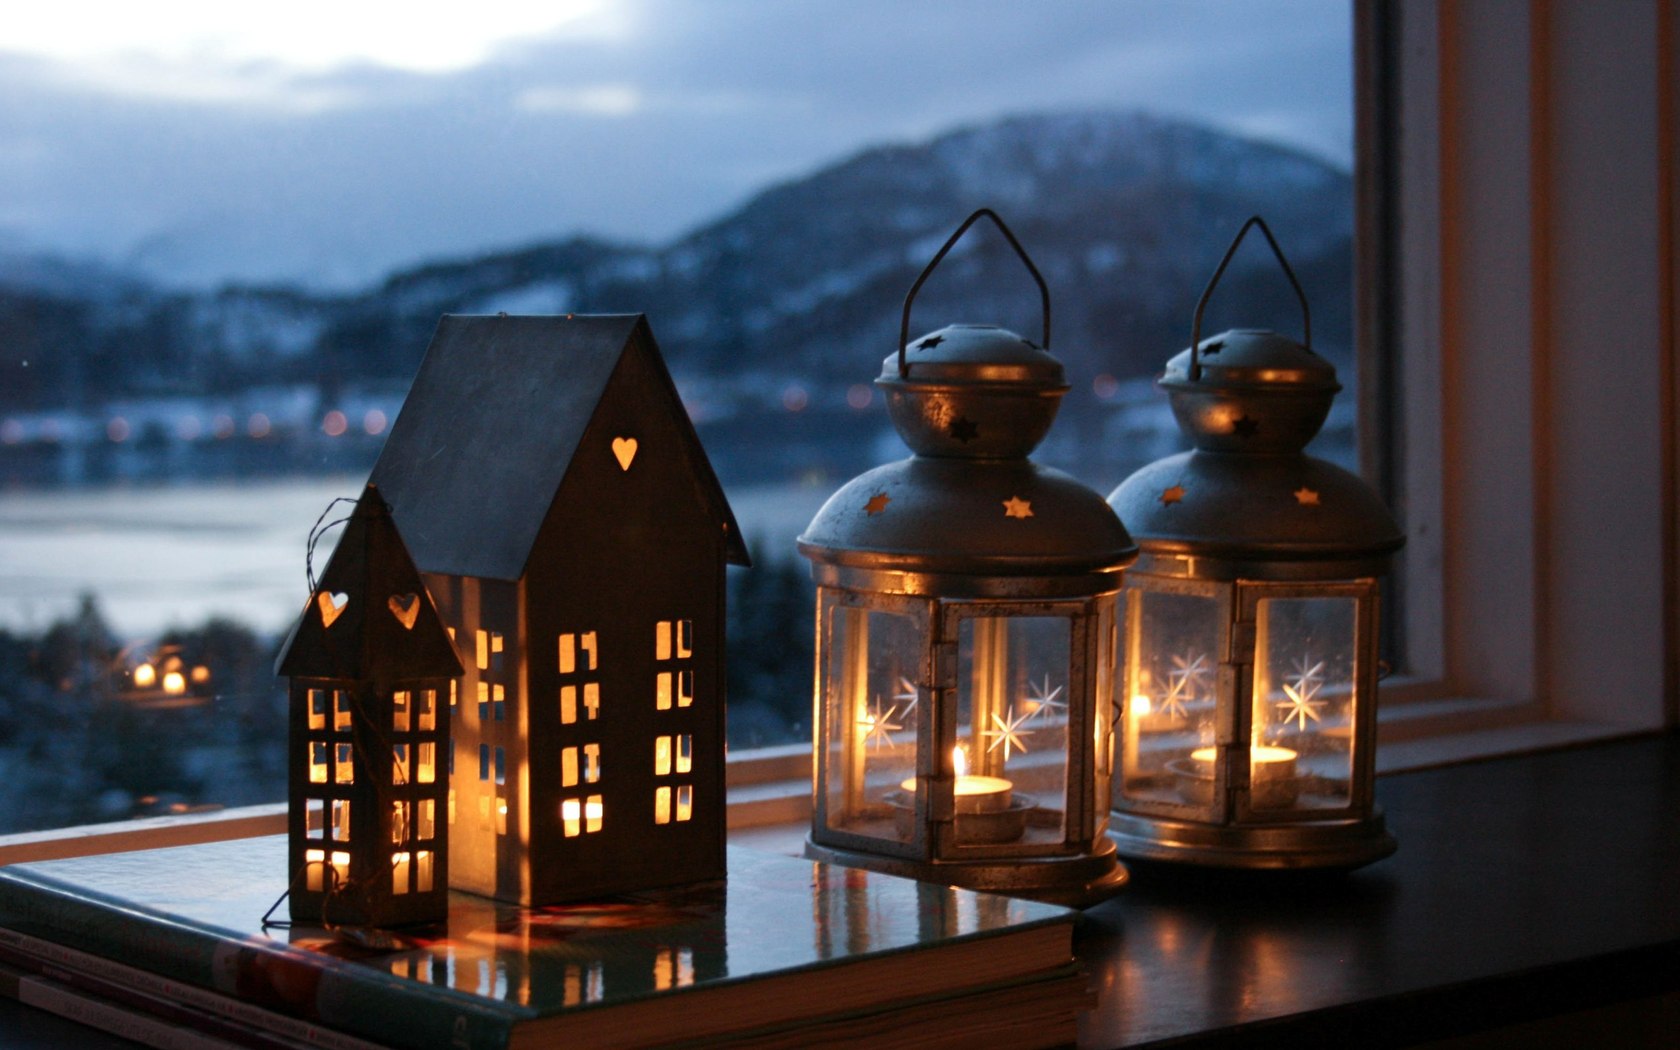 Download wallpaper lodge, Candles, window, sill free desktop wallpaper in the resolution 2560x1600